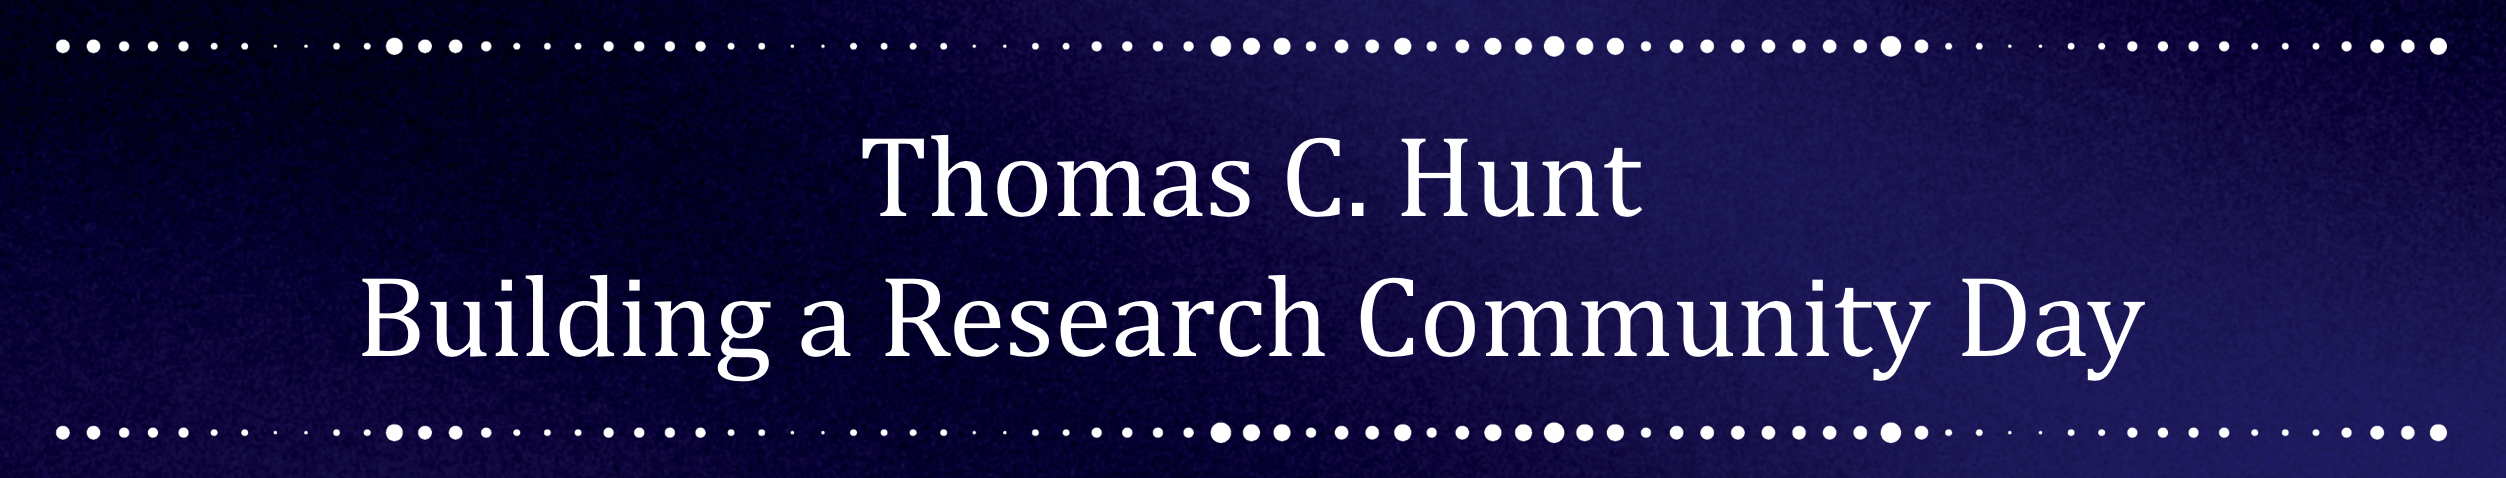 Thomas C. Hunt Building a Research Community Day